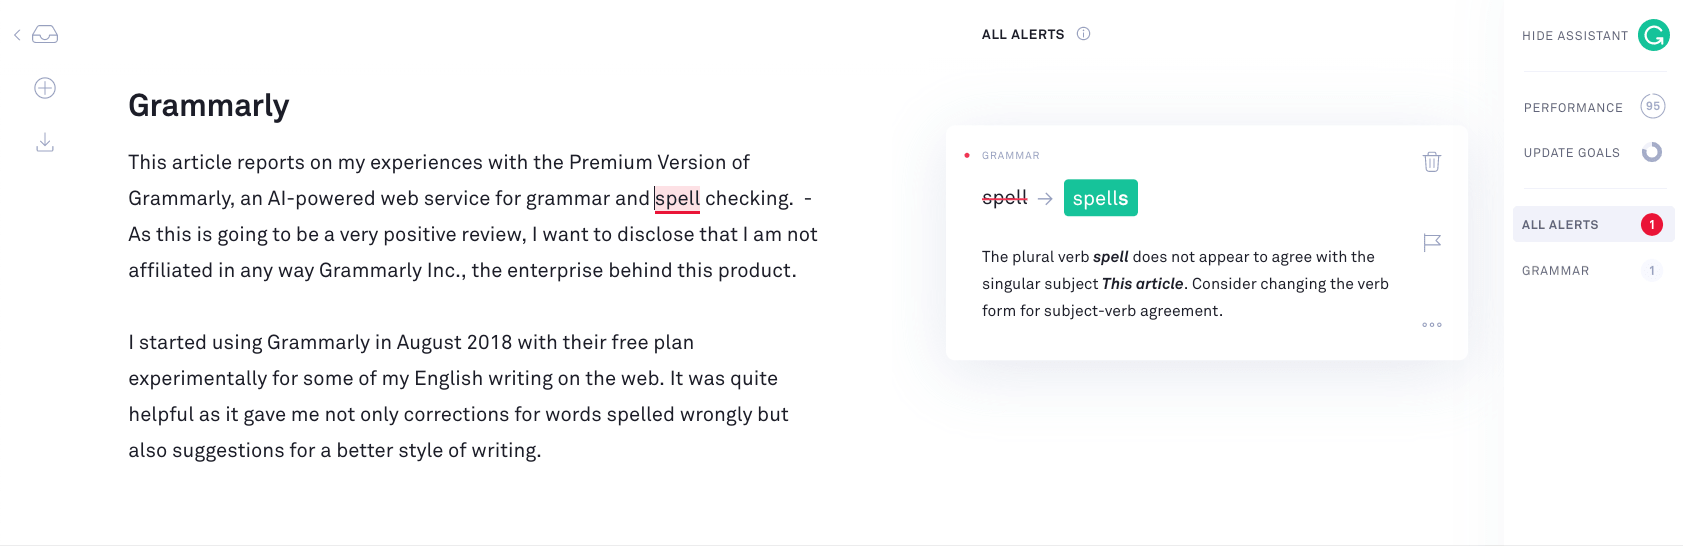 Screenshot of a wrong recommendation by Grammarly